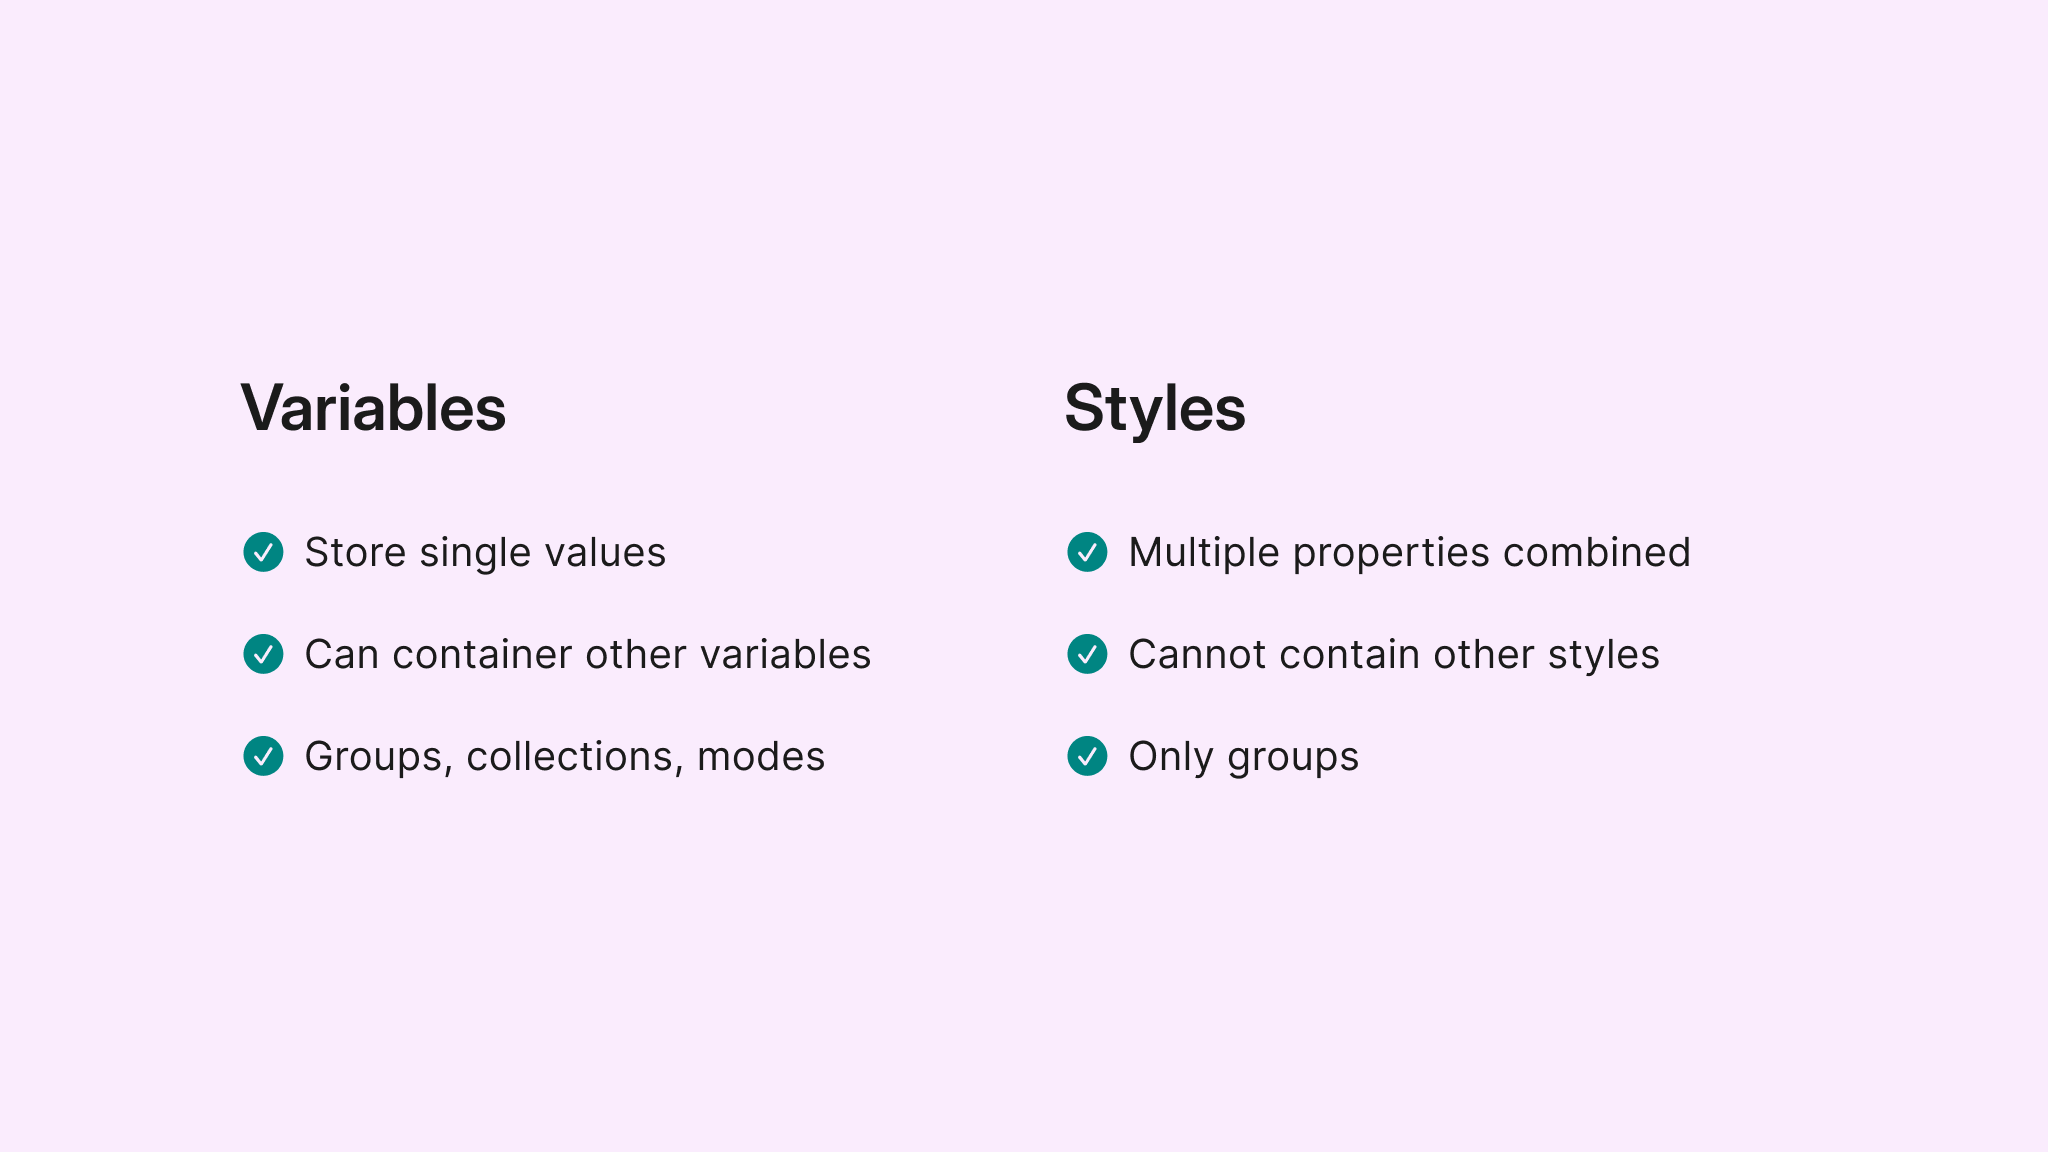 Variables and styles differences as explained in text.